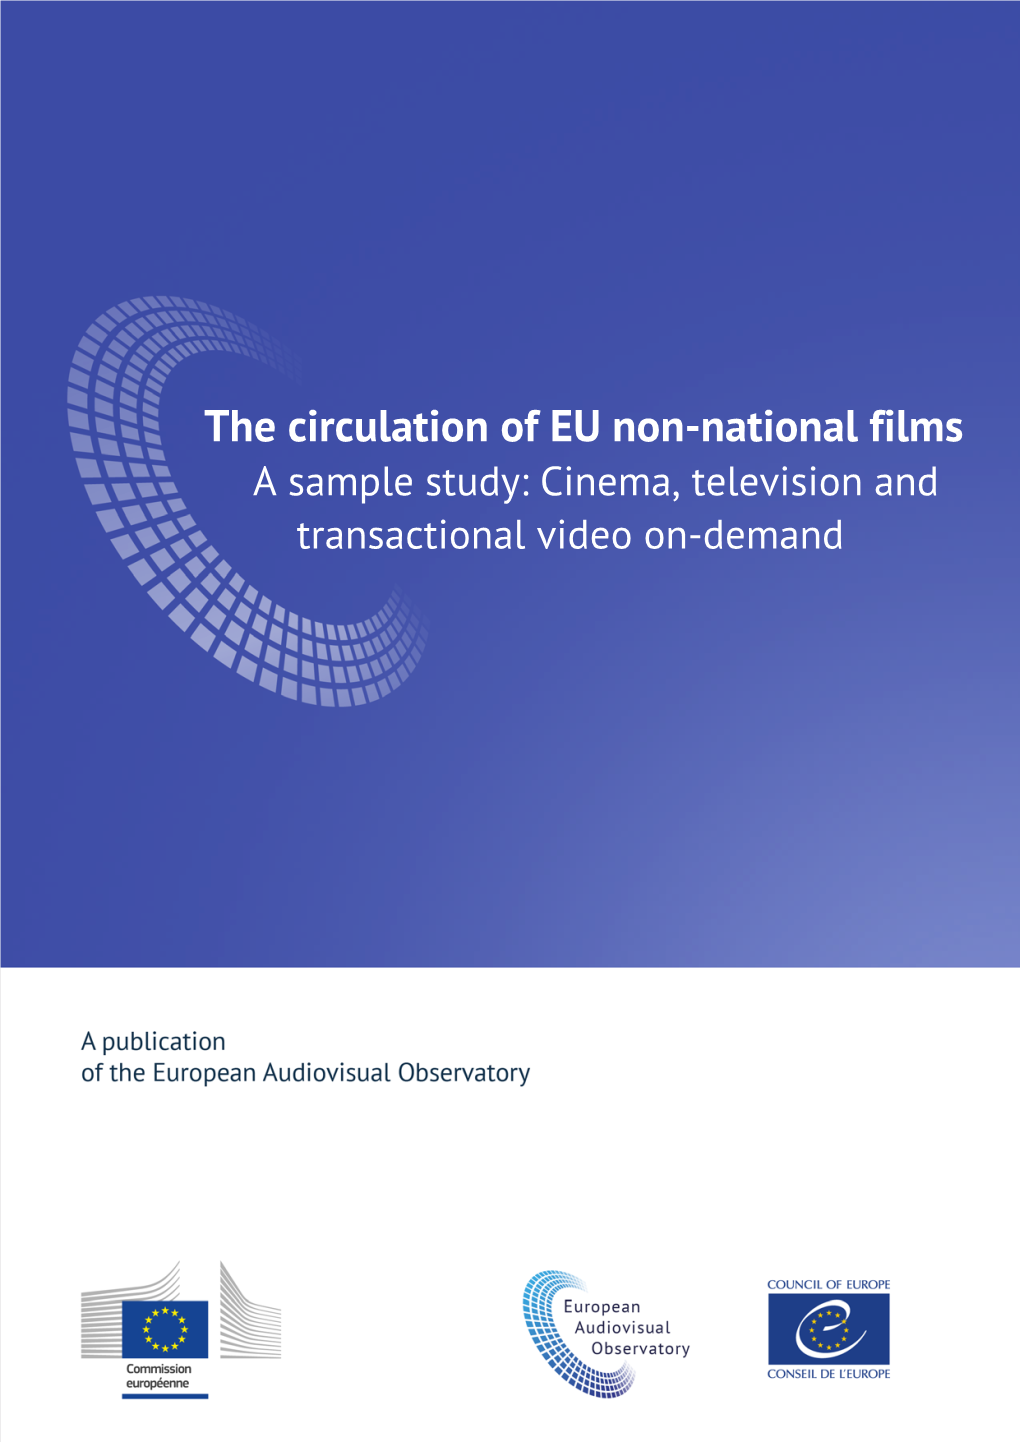 The Circulation of EU Non-National Films a Sample Study: Cinema, Television And